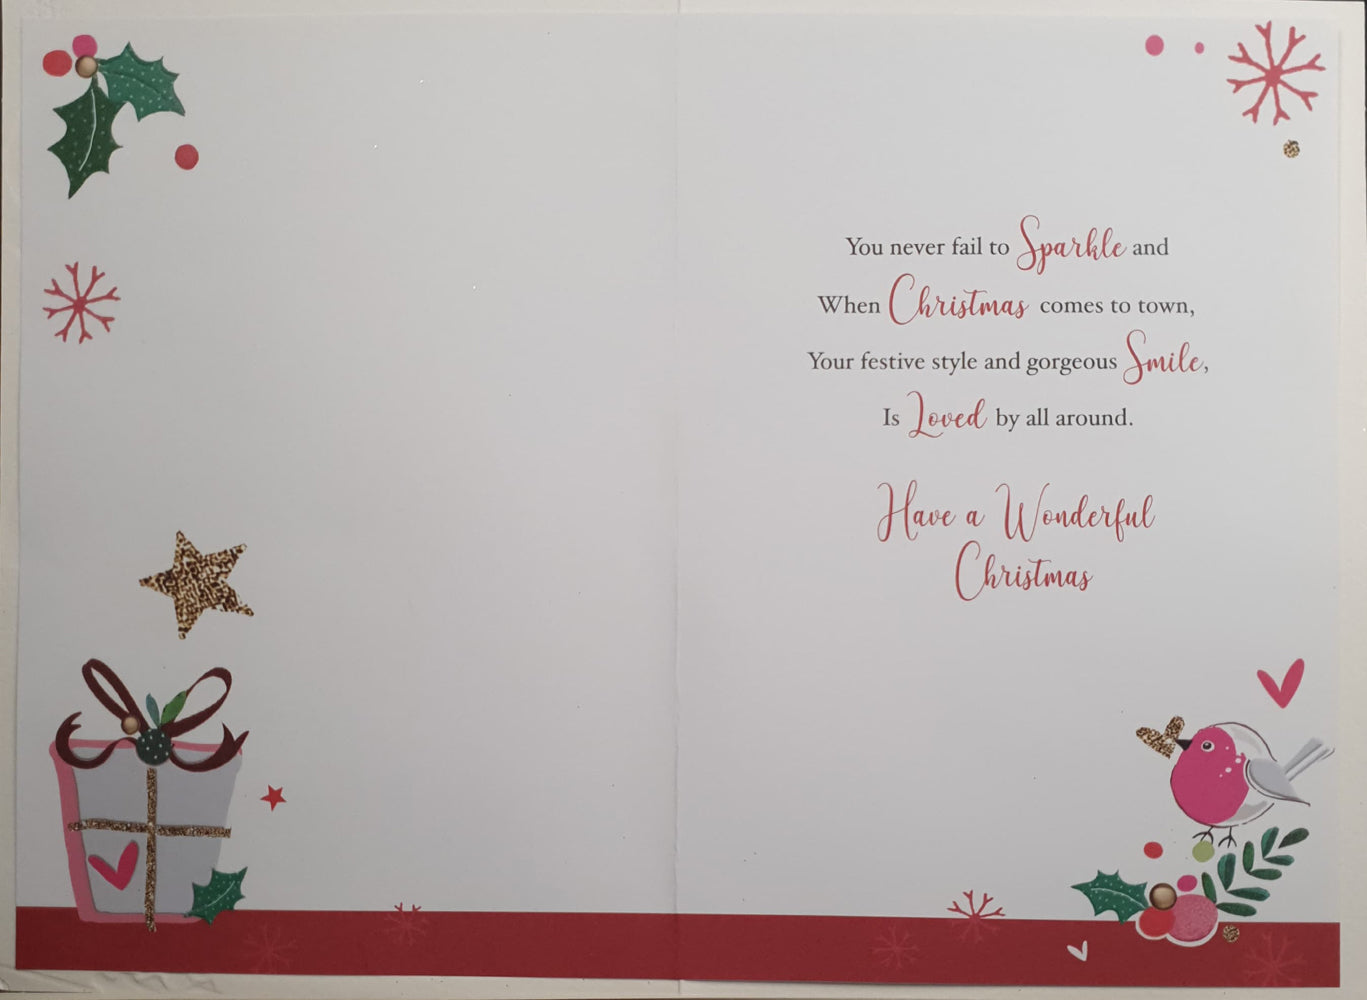 Special Daughter Christmas Card - Lots Of Wine Glass